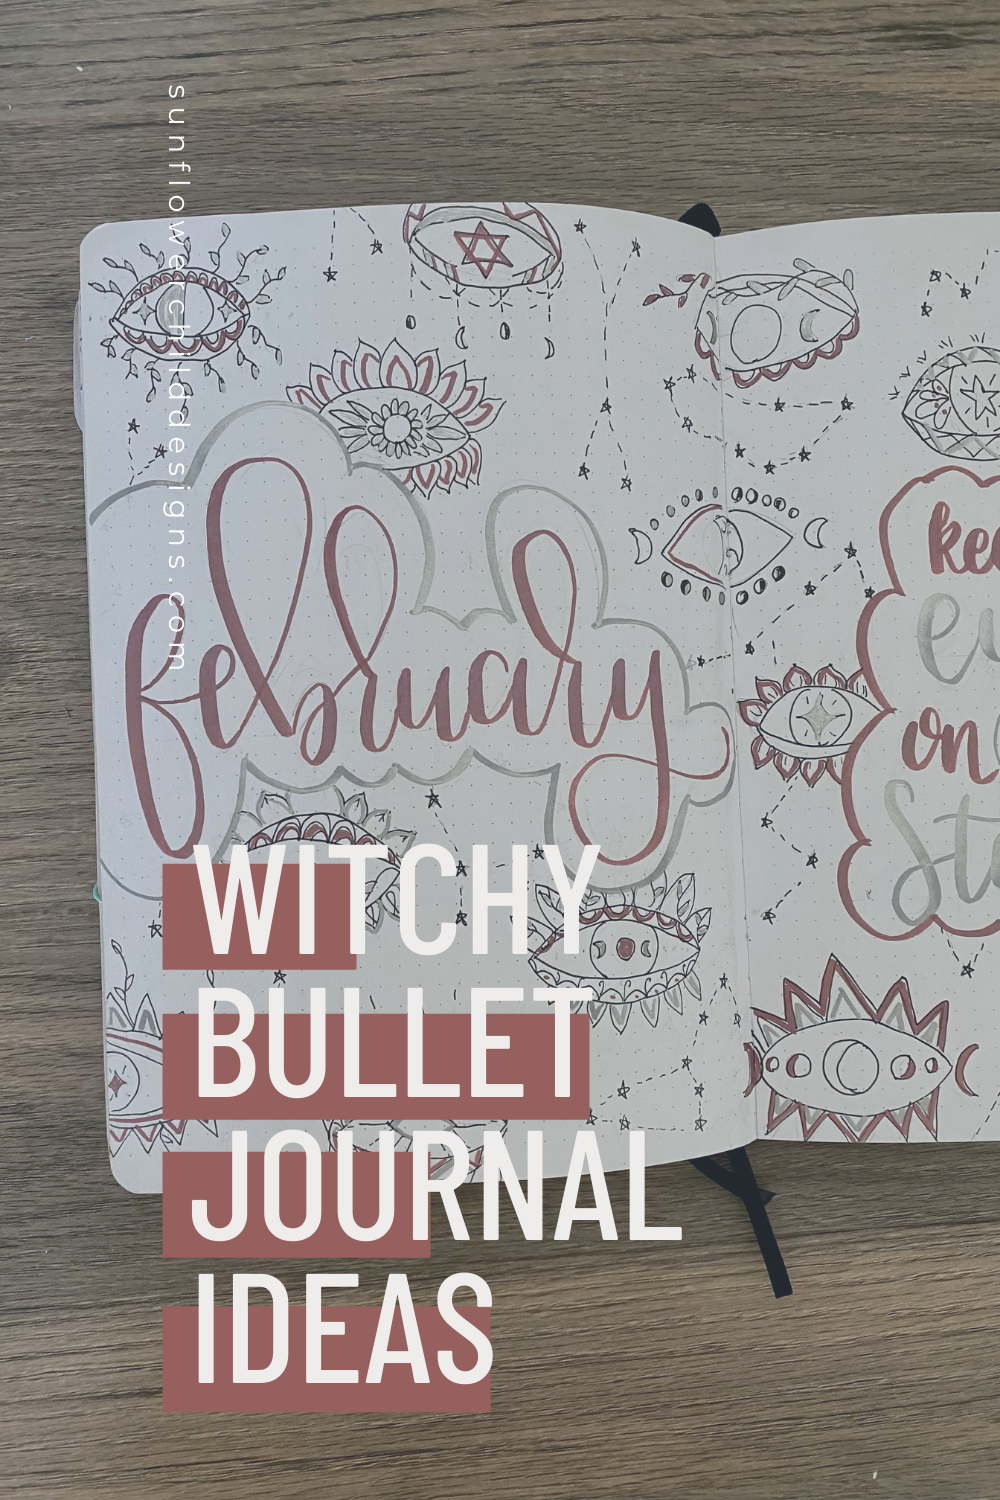 witchy-bullet-journal-ideas-february-bullet-journal-ideas 5.png